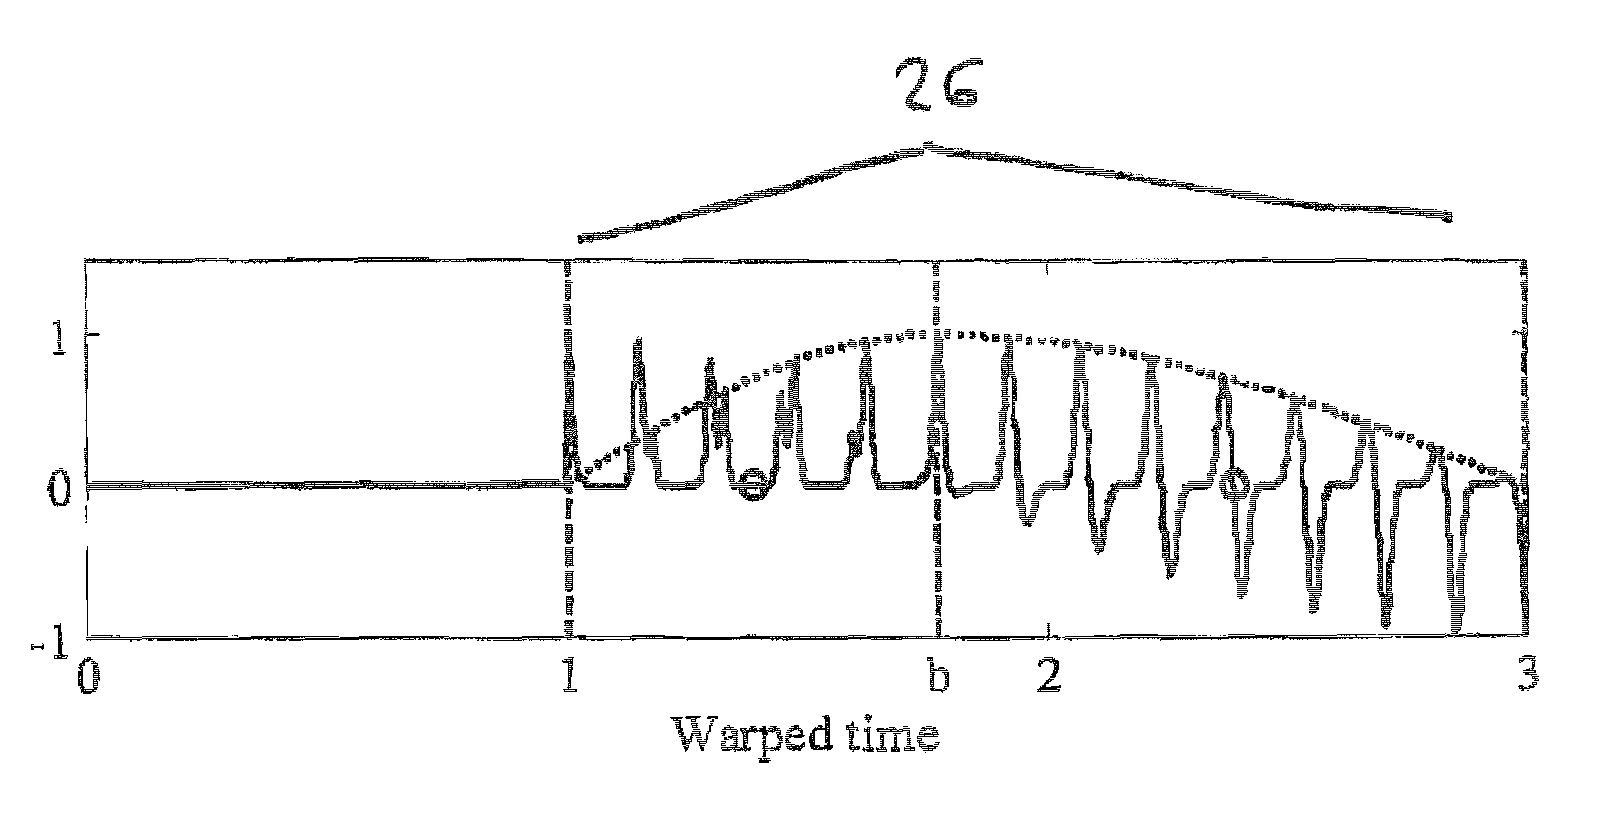 Time warped modified transform coding of audio signals